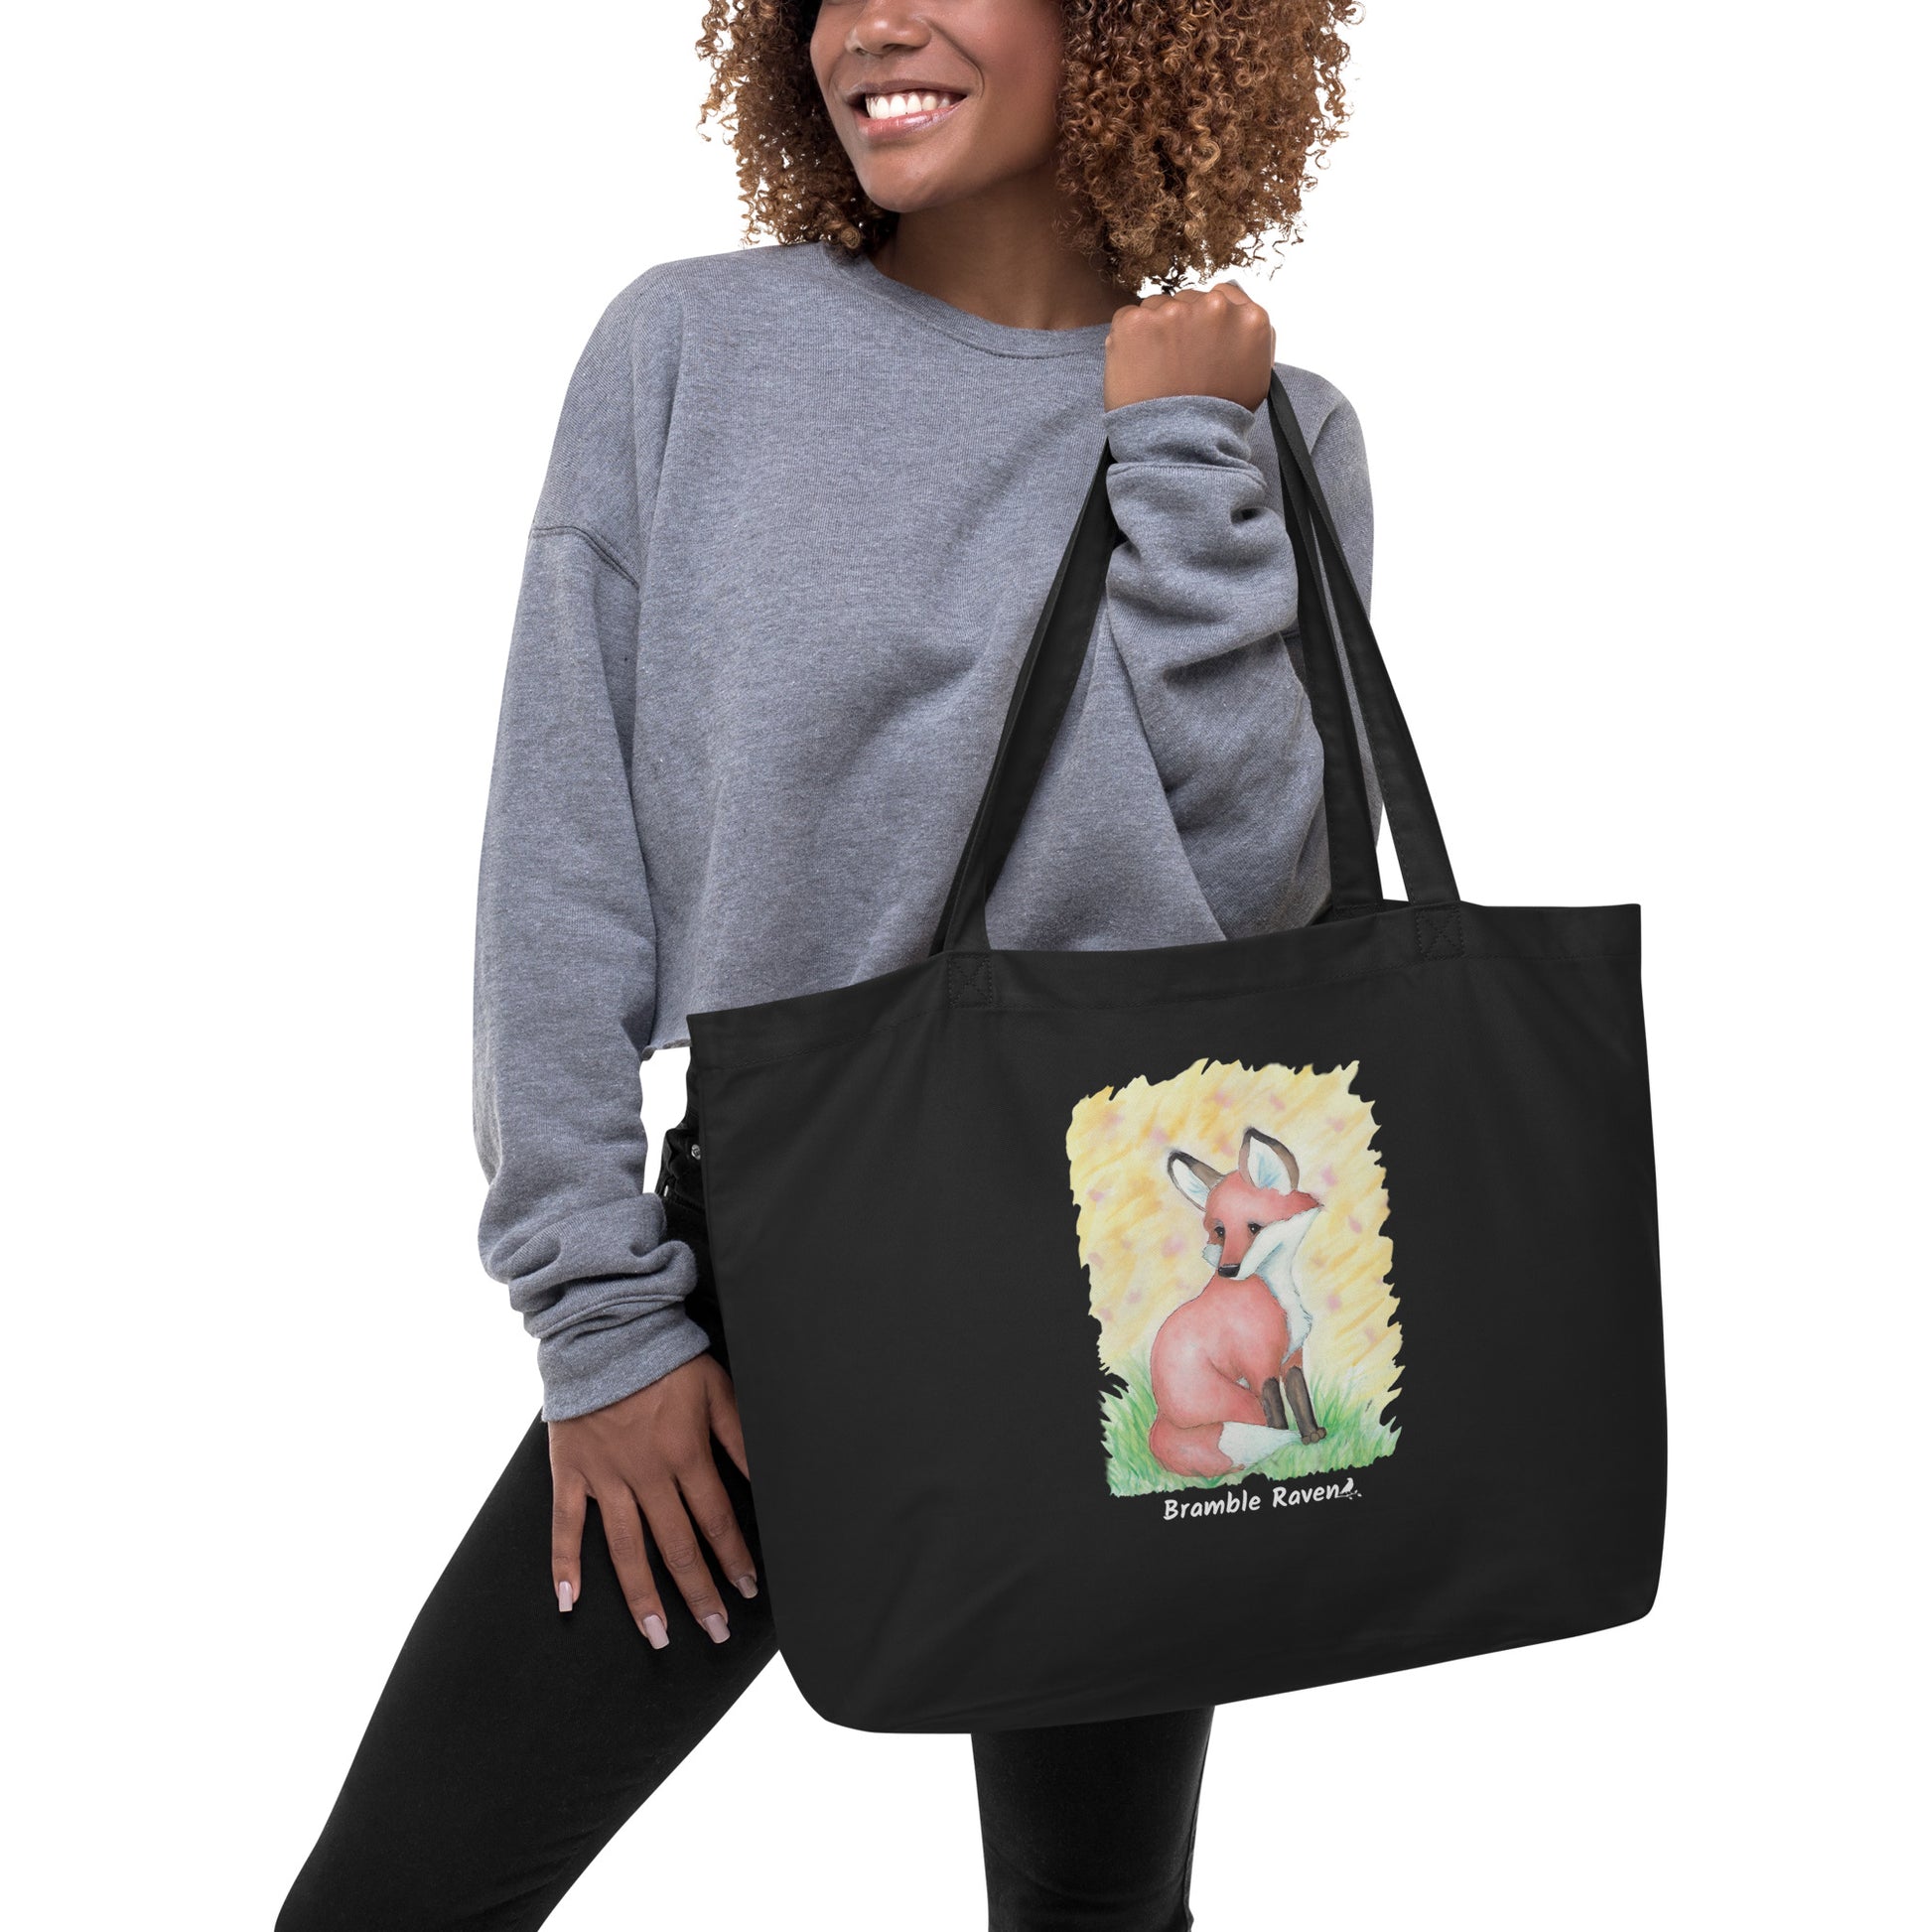 Original watercolor fox painting in the grass with yellow background. Printed on large black colored eco tote. 20 by 14 by 5 inches. 100% recycled cotton. Shown being held by female model.